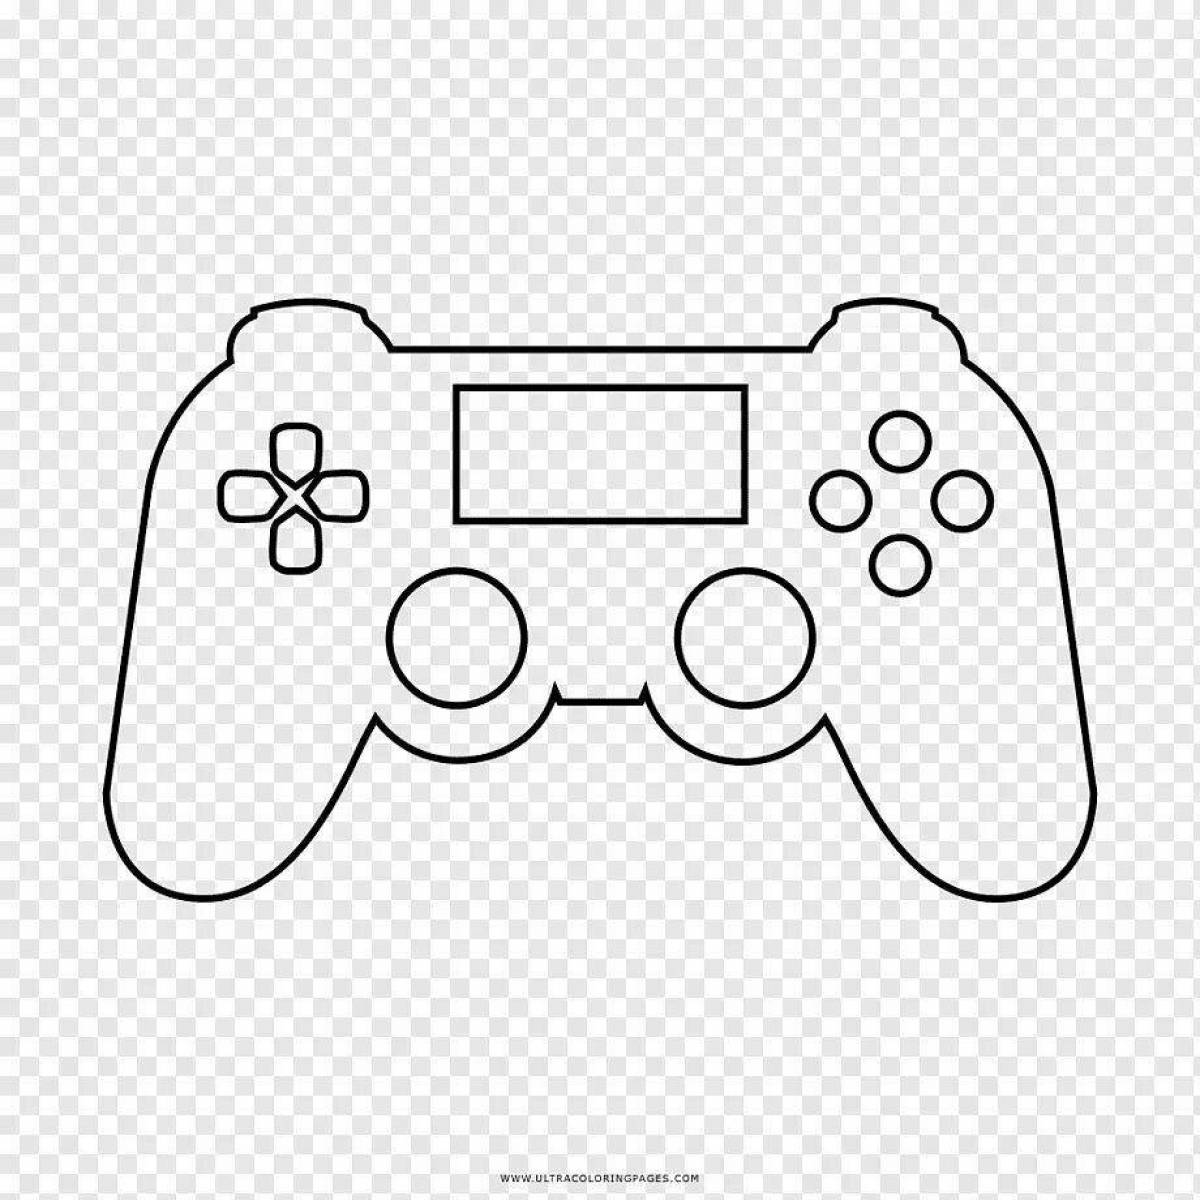 Colorful bright gamepad coloring page